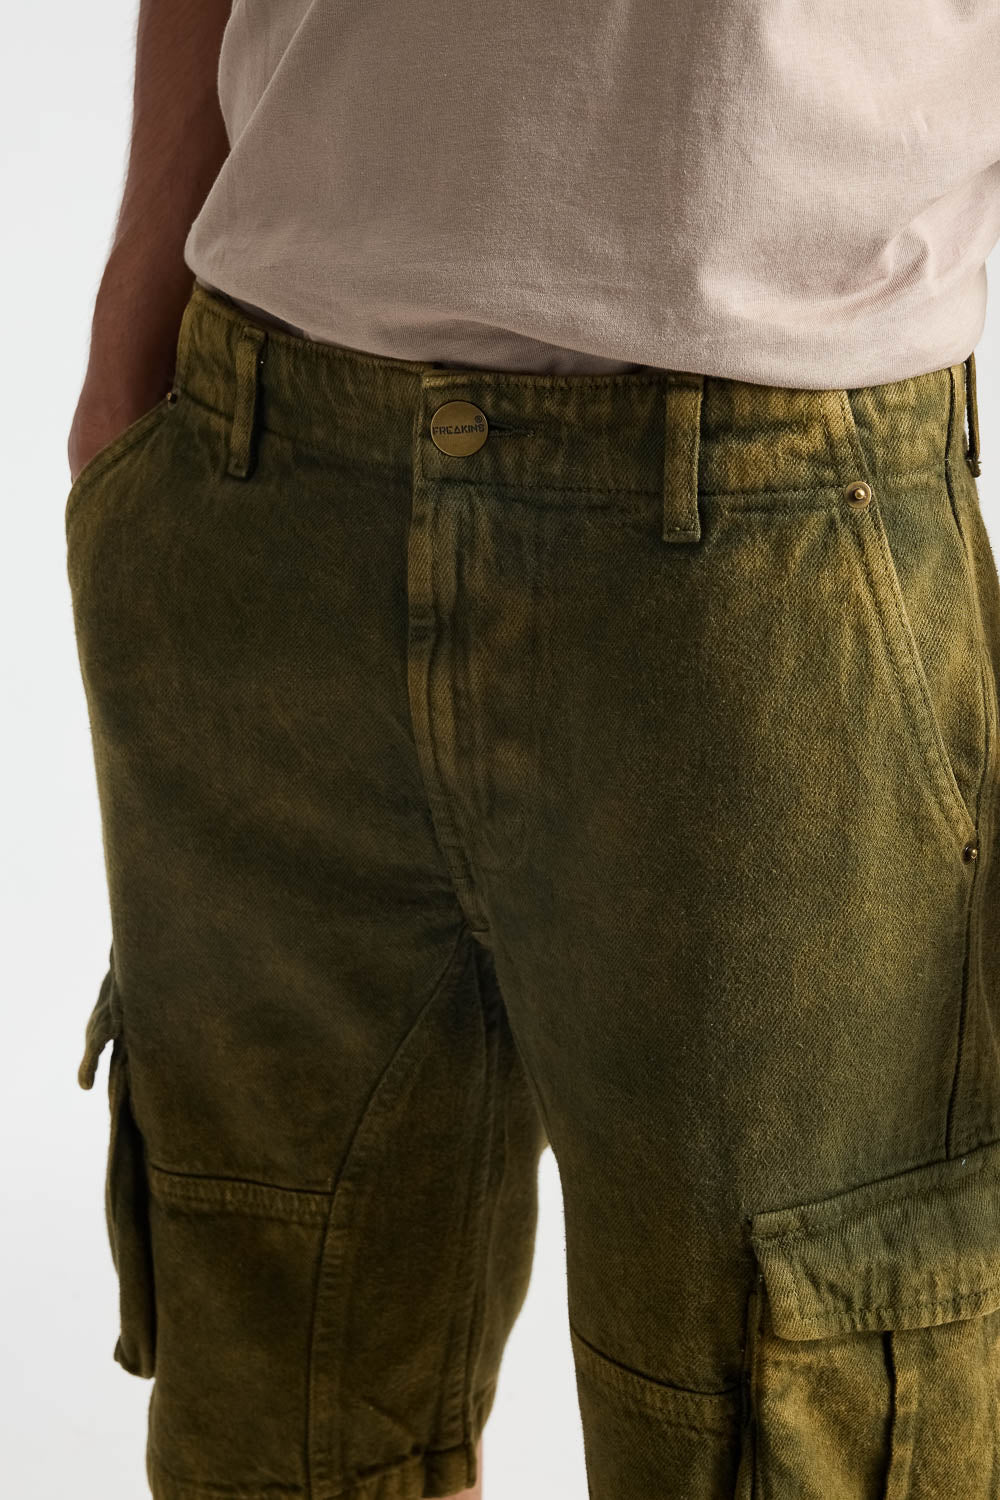 OLIVE TINTED MENS CARGO SHORTS